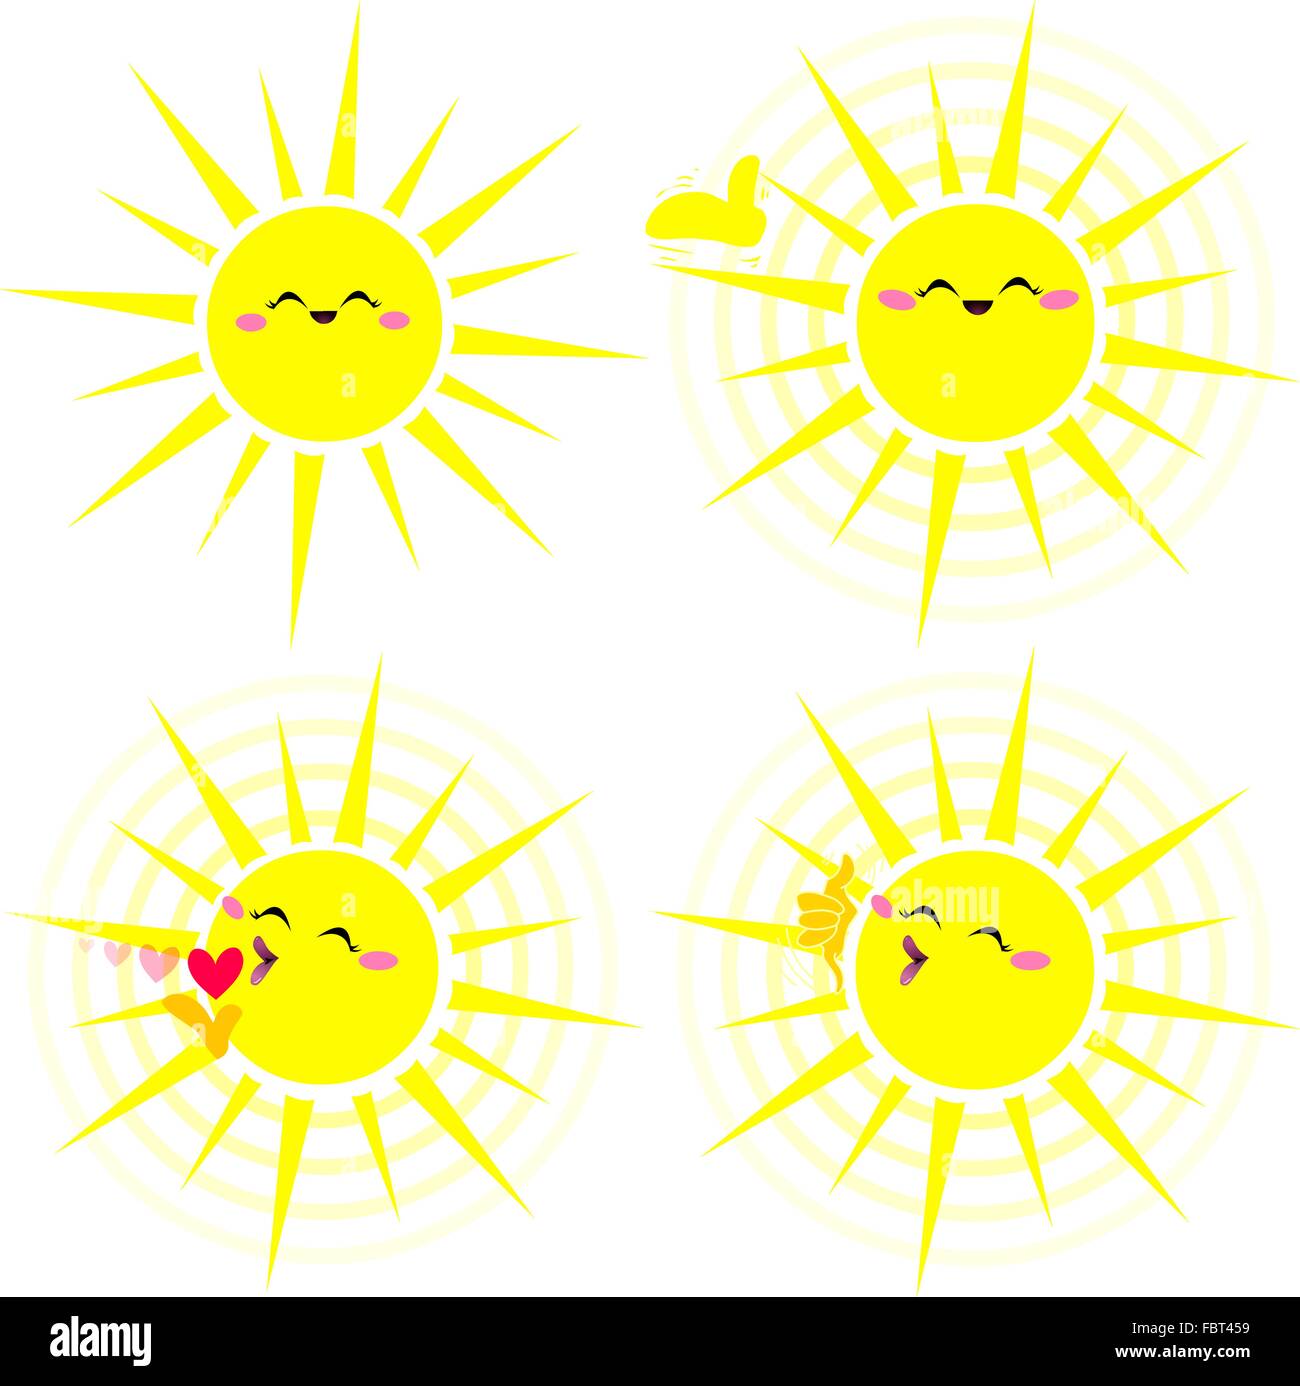 A vector illustration pack of a shiny happy yellow sun in various poses. Stock Vector